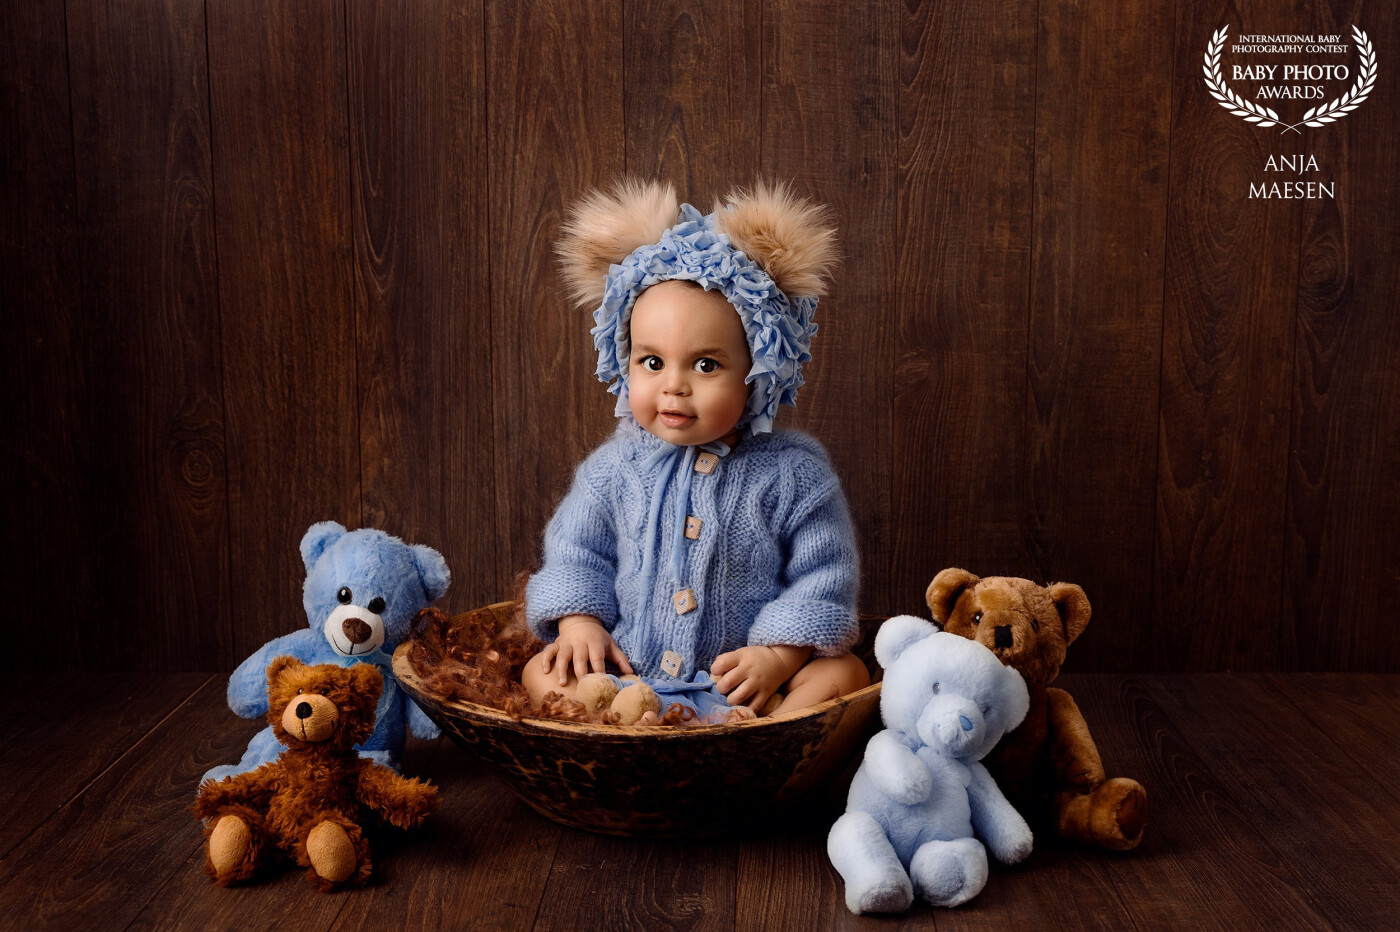 This beautiful little boy came to my studio for his first B-day.  Cutest little bear ever...